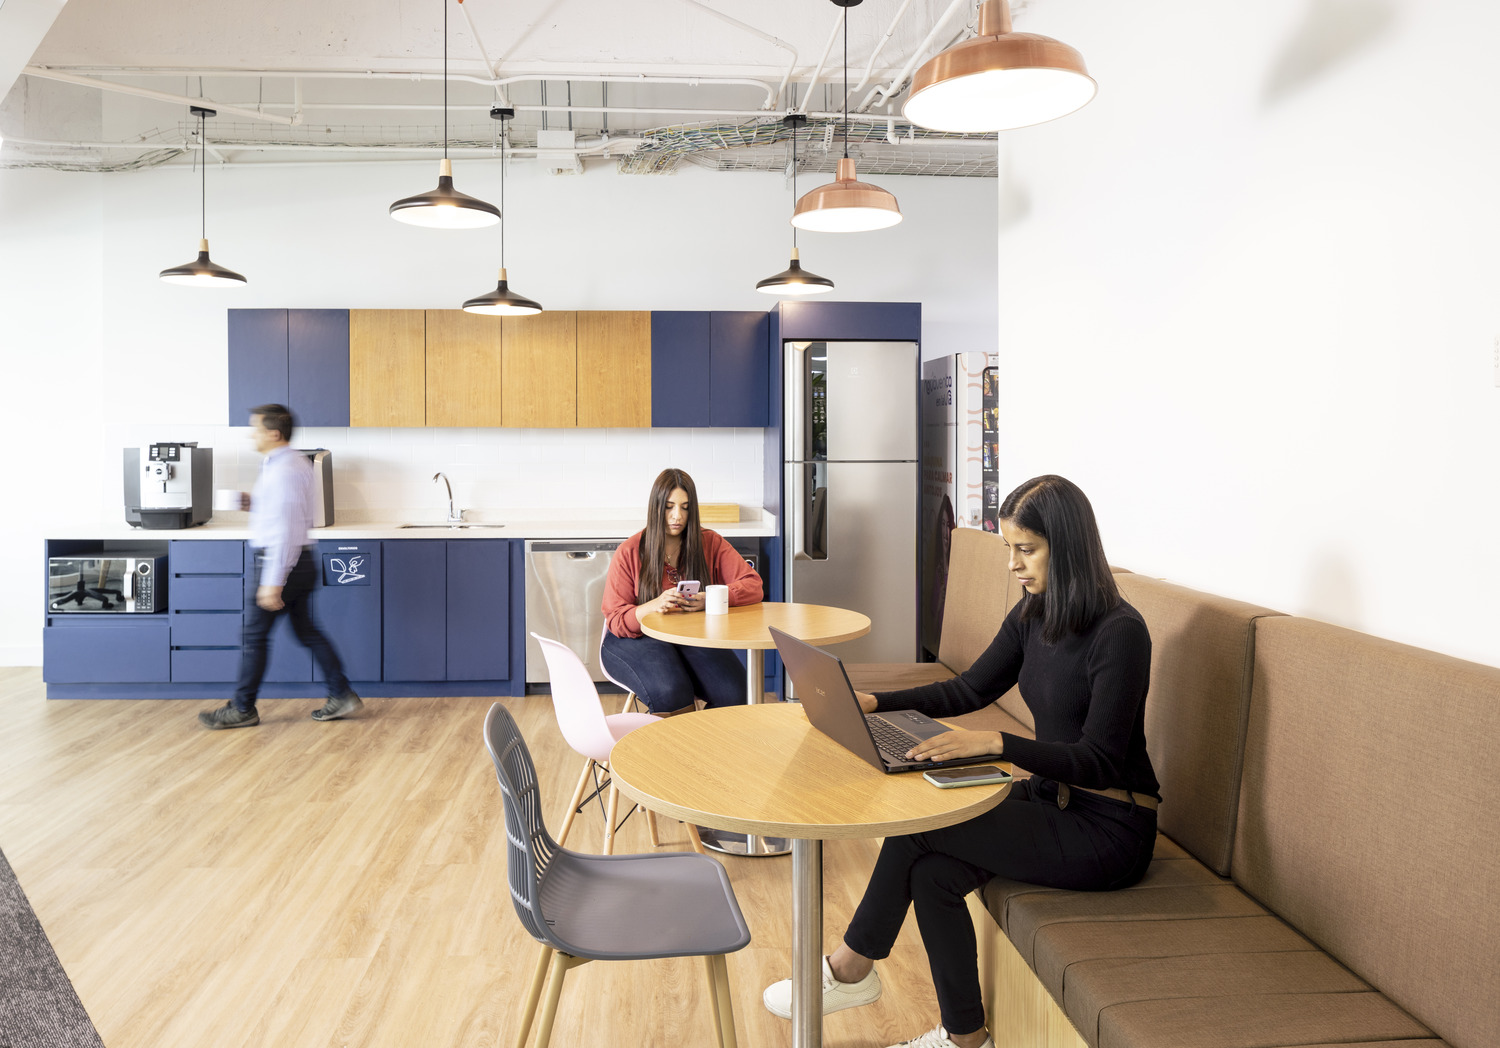 Global medical device company workspace next to kitchen